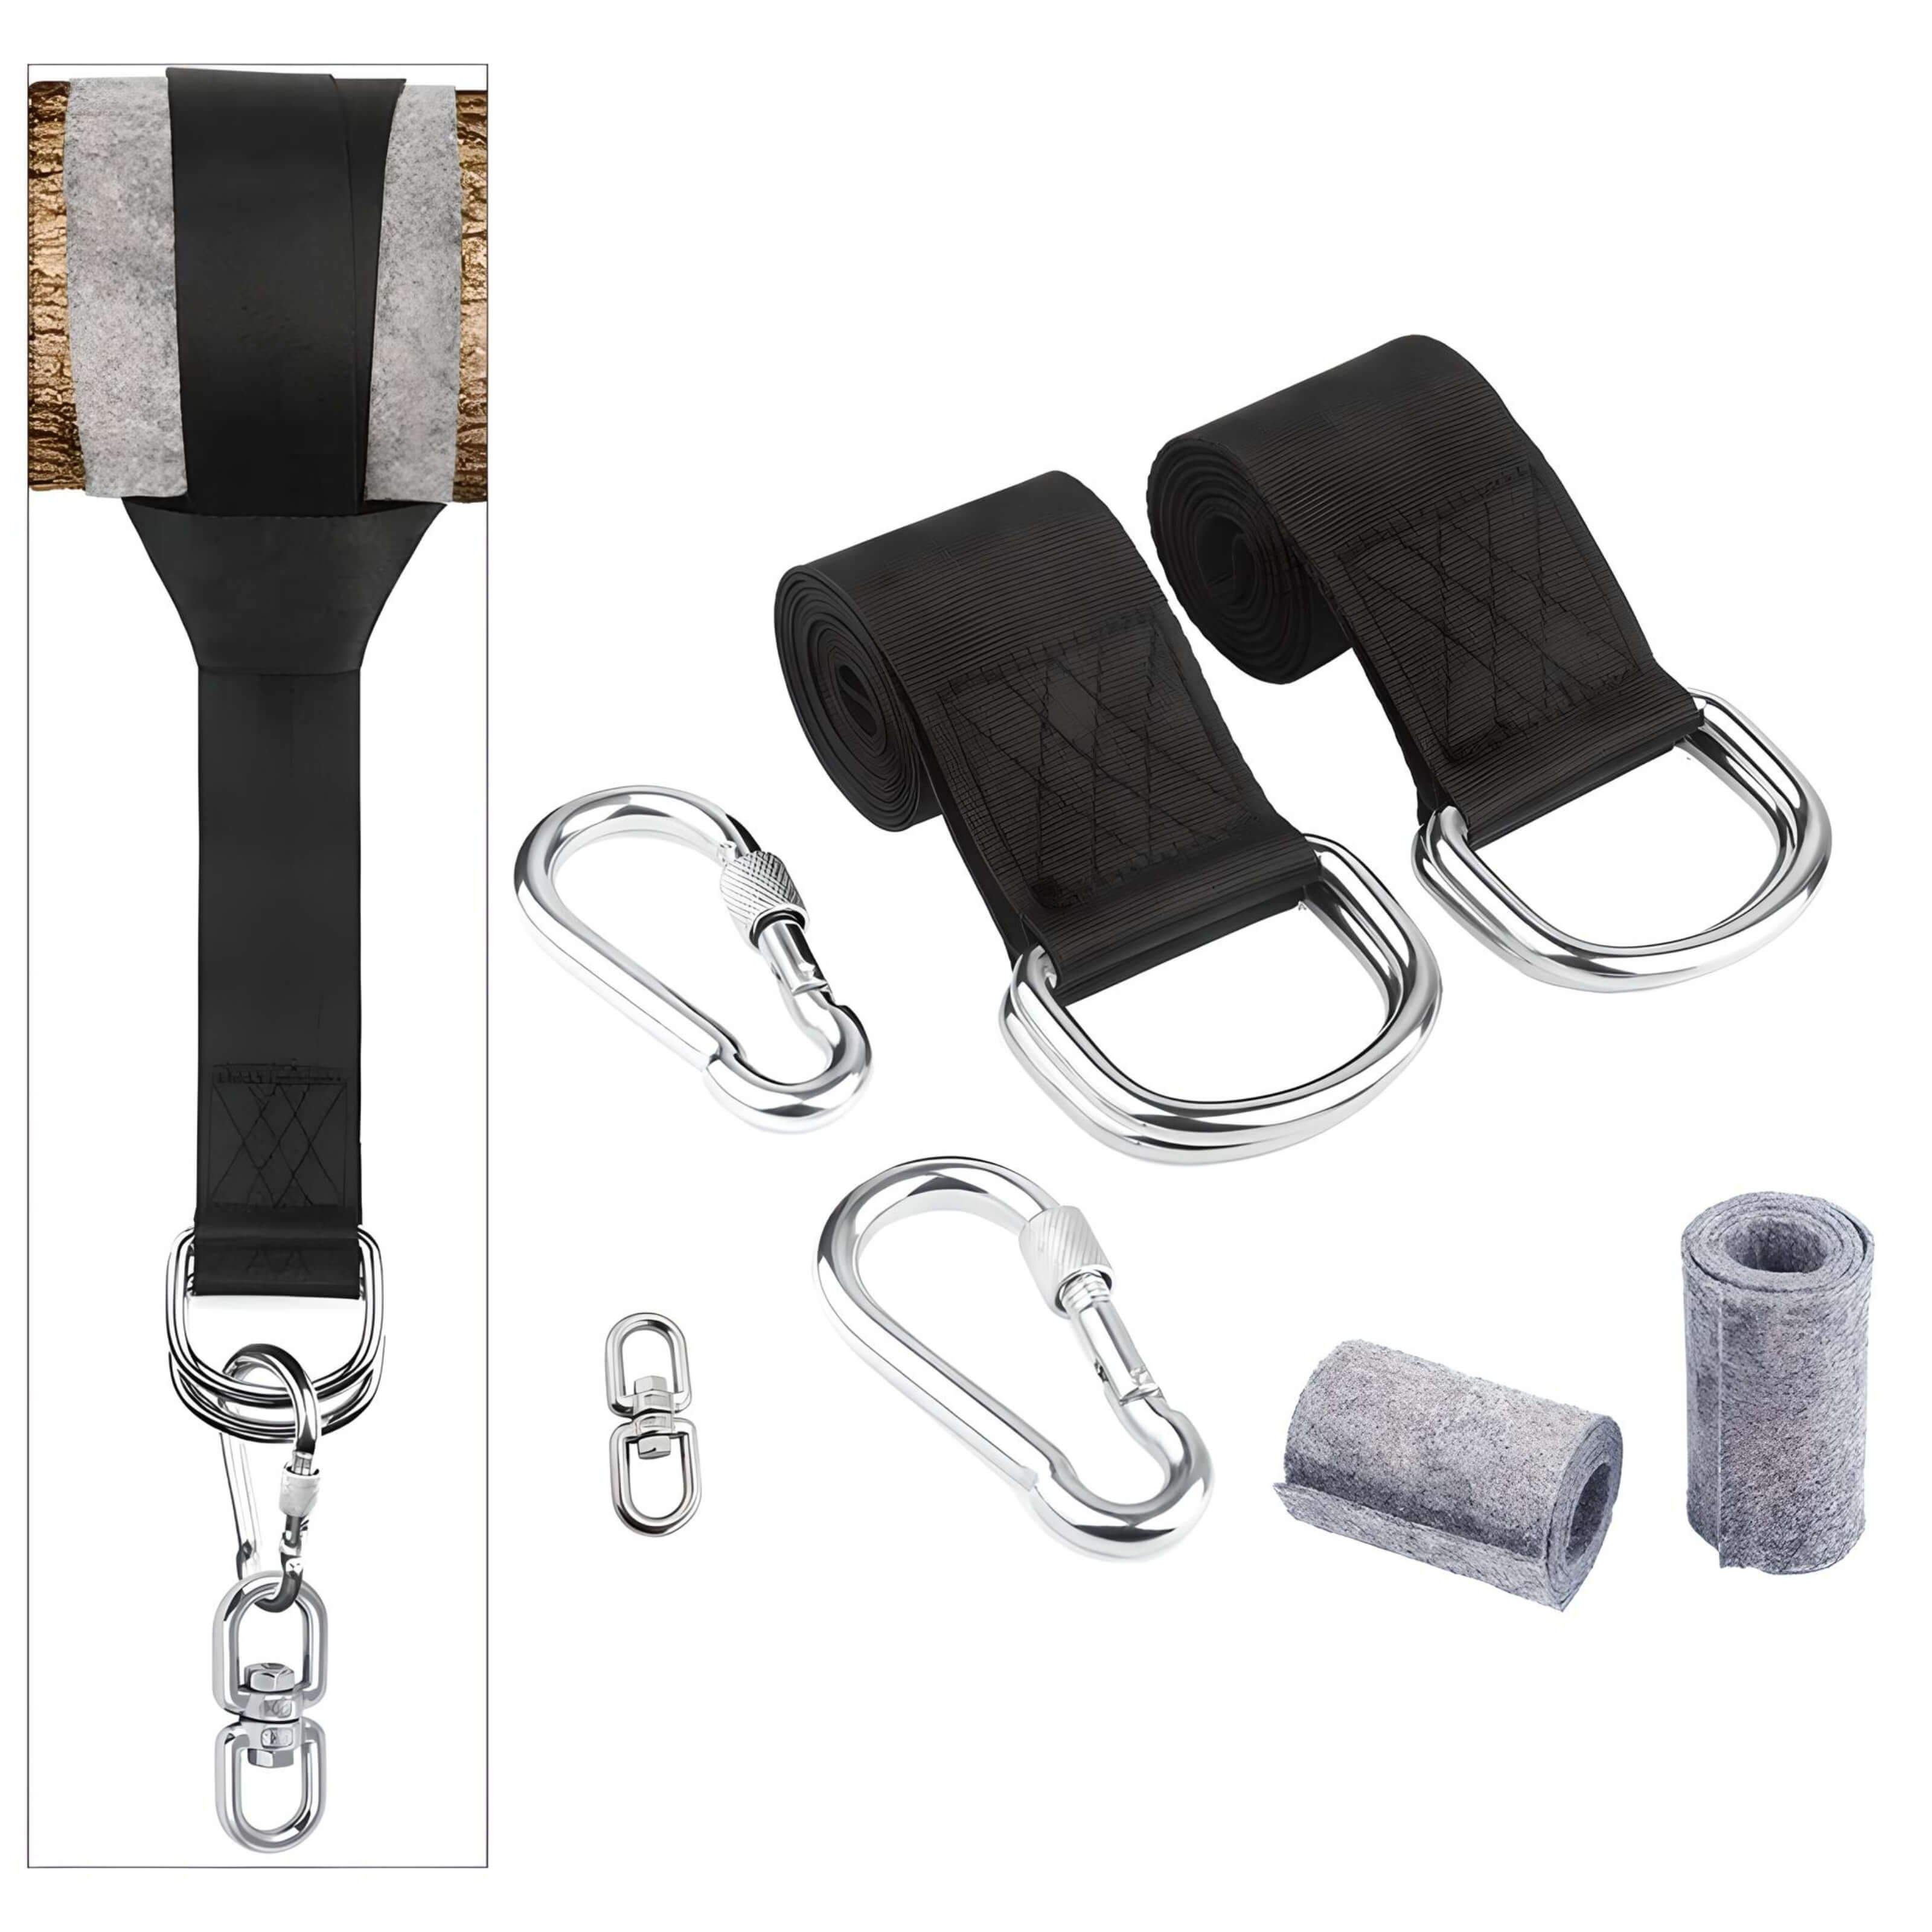 aadjustable-tree-swing-straps-in-inside-the-boxes